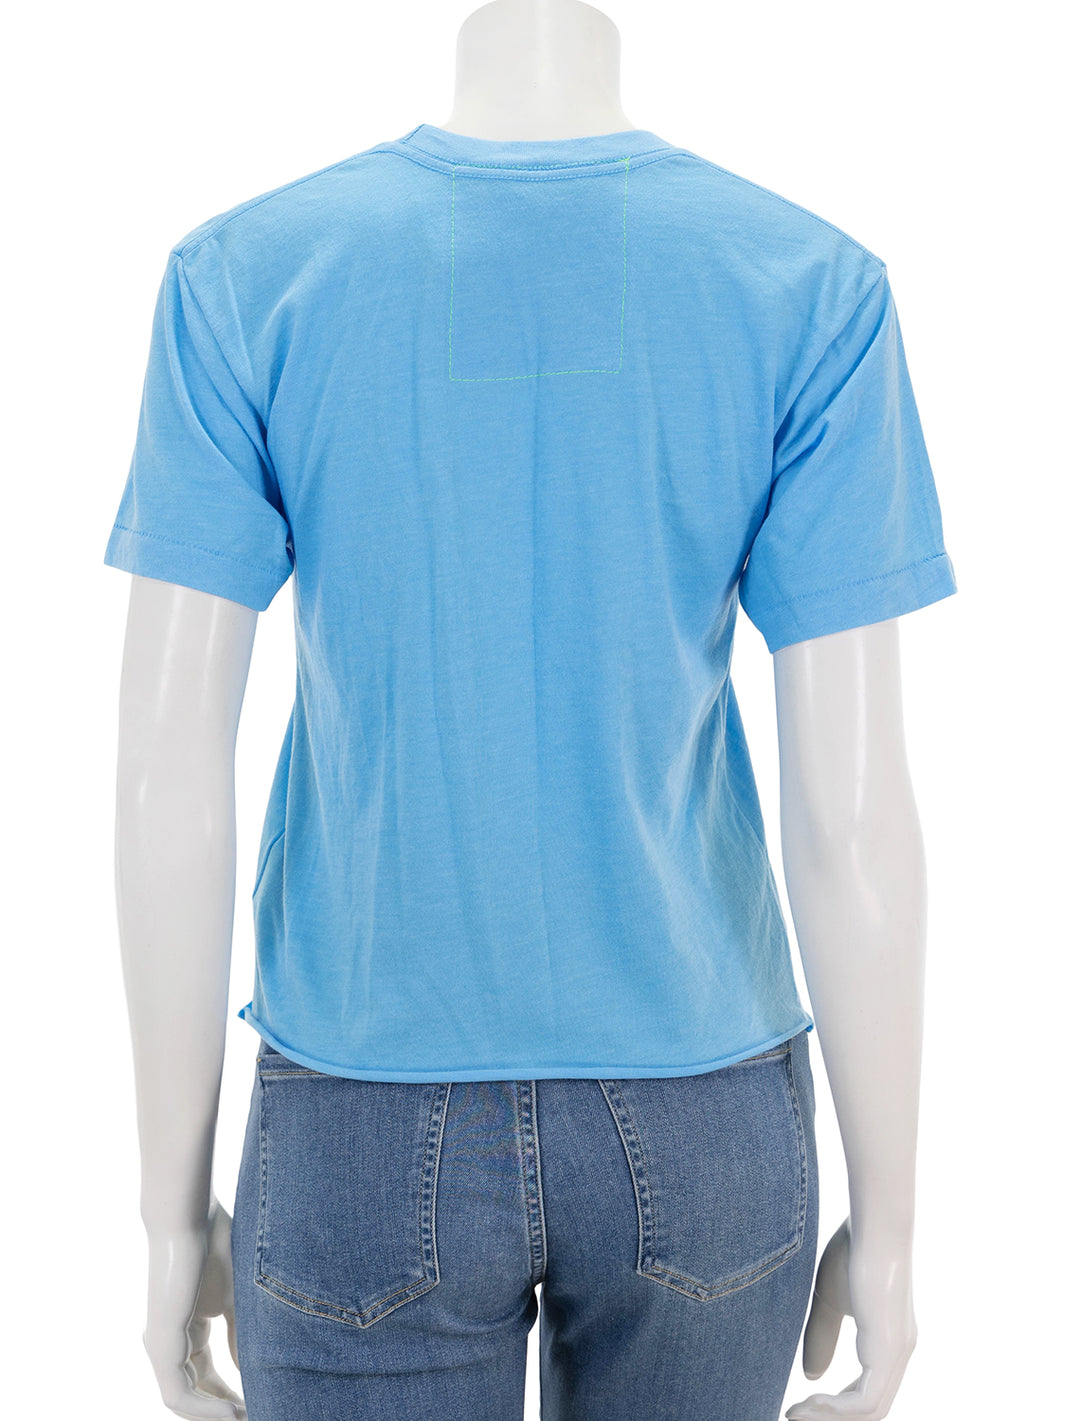 Back view of Aviator Nation's rainbow embroidery boyfriend tee in sky.